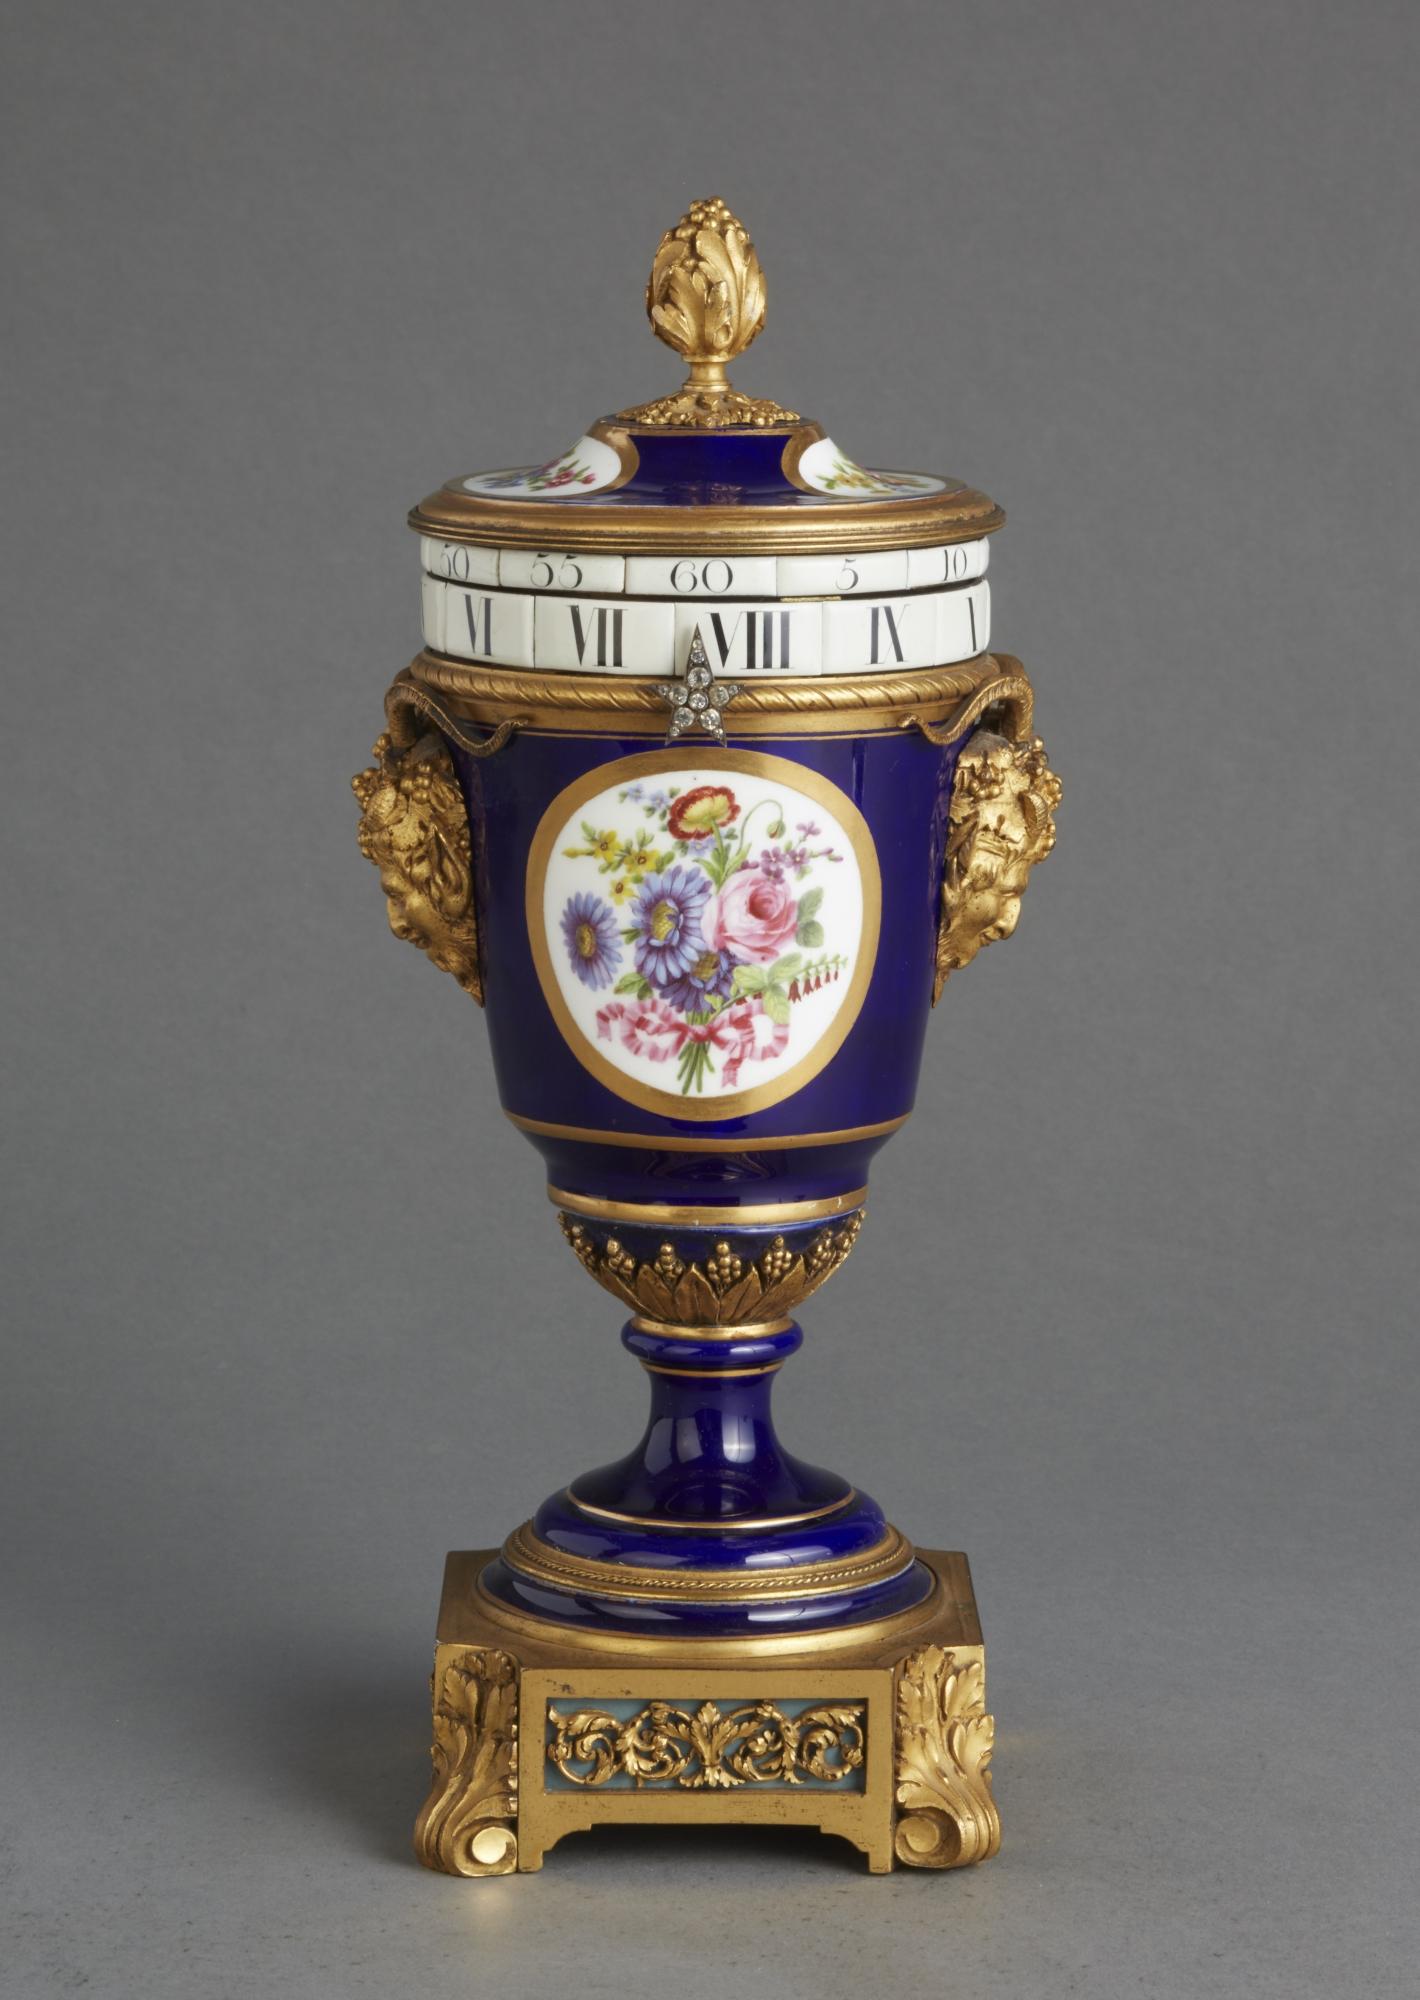 
The beautiful proportions and the typical Sevres blue color and flowers are of a very high quality.

Mounted with beautiful cast fire gilt bronzes and a lovely hand in the form of a star with crystals.

The 8-day striking movement with two rotating